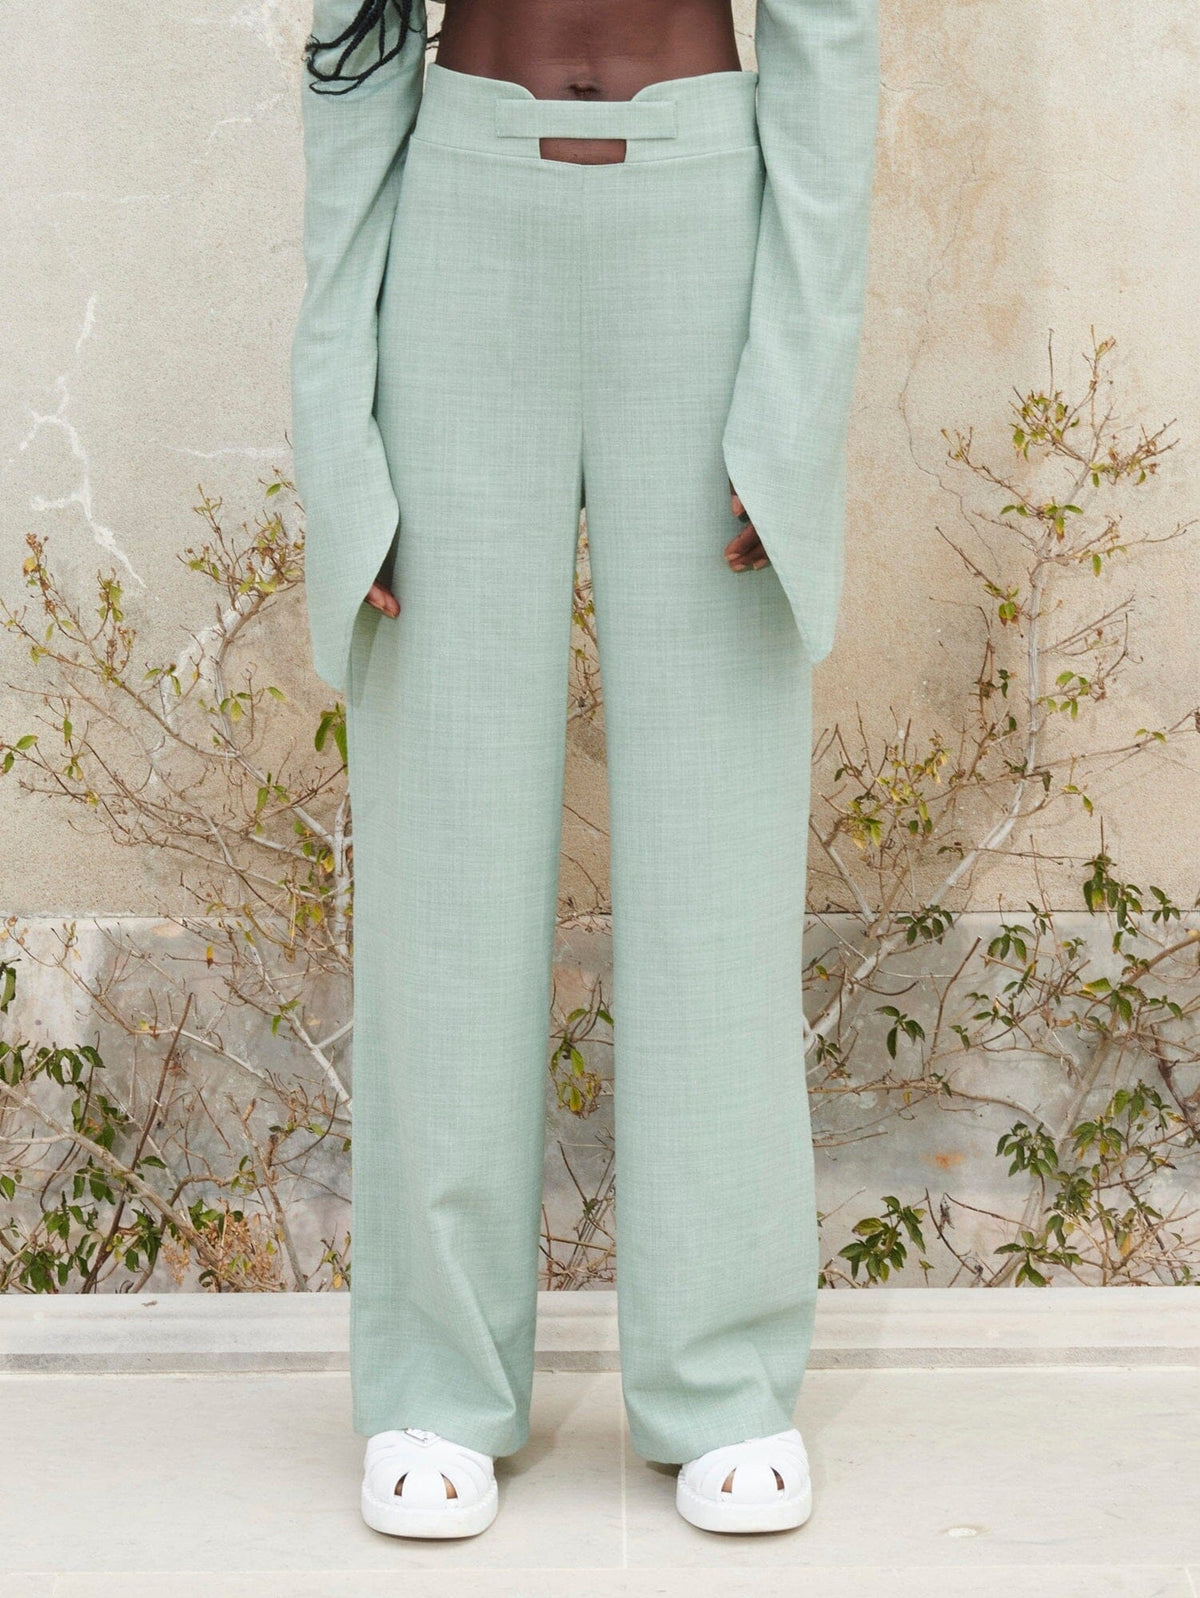 ACIS - High-waisted pants in celadon green Oeko-Tex fabric from Cotton Pants Fête Impériale